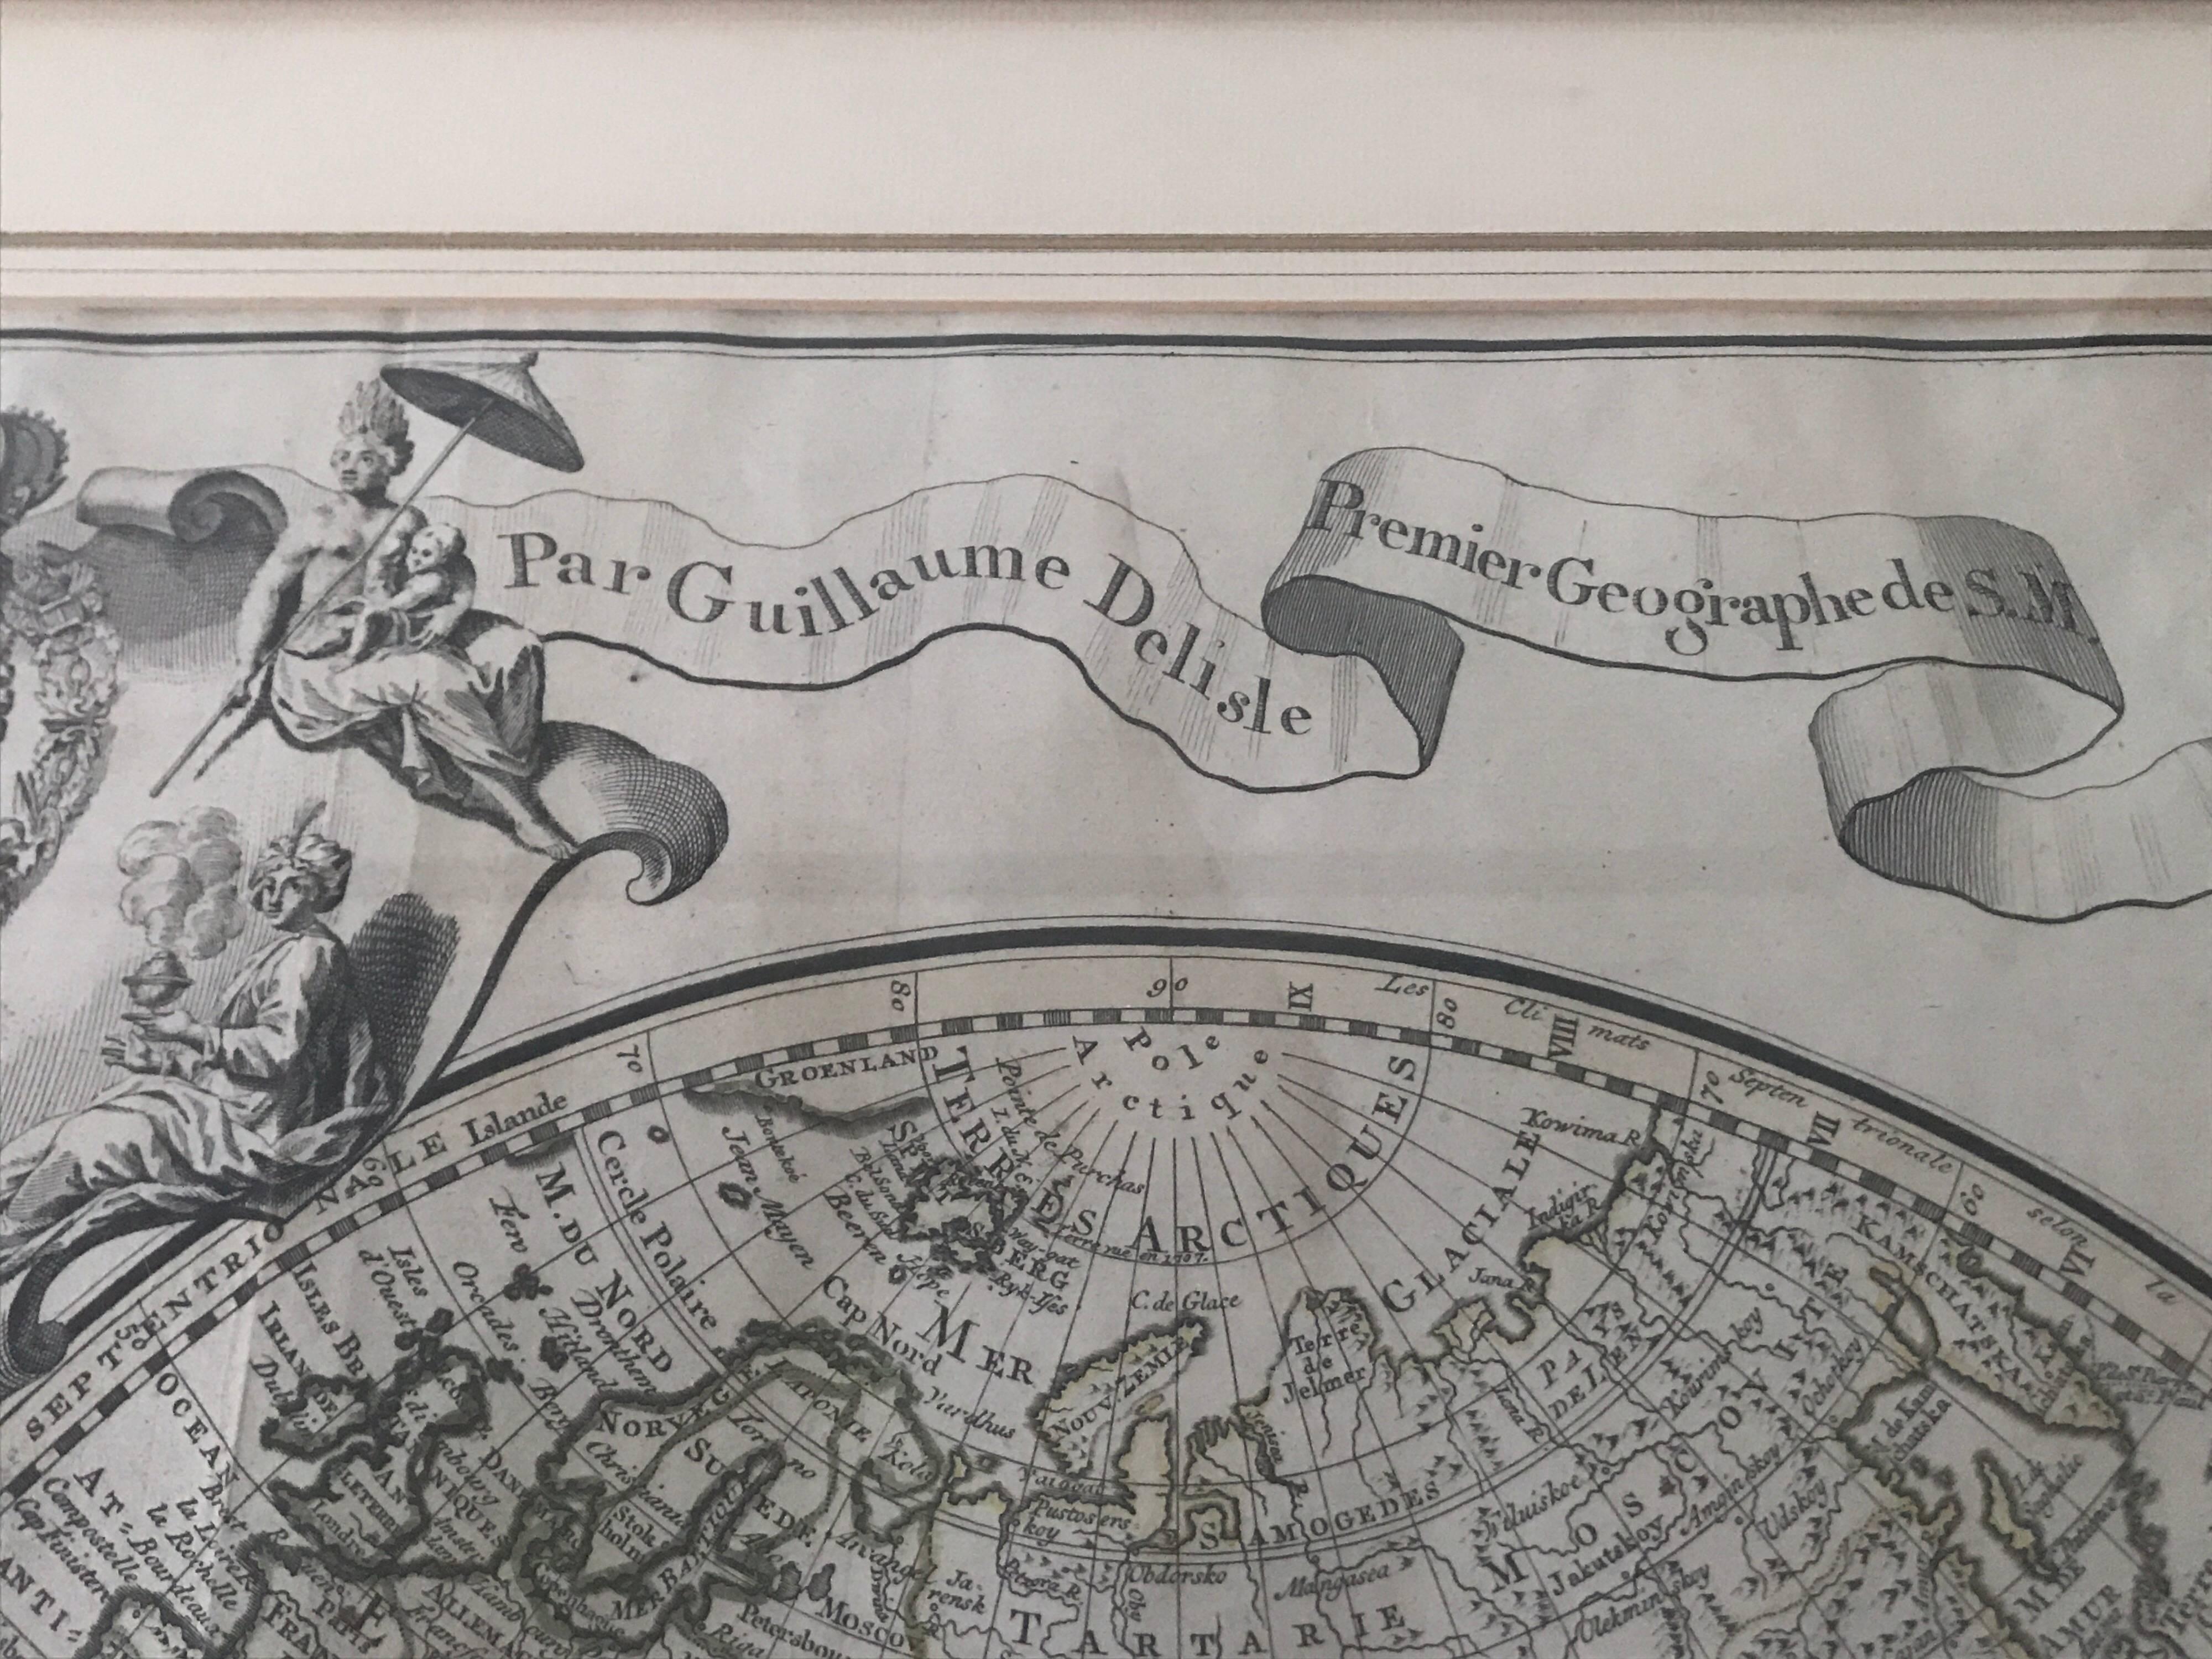 Paper Extremely Rare Mappemonde a l'usage World Map Delisle, Guillaume Buache, 1730 For Sale